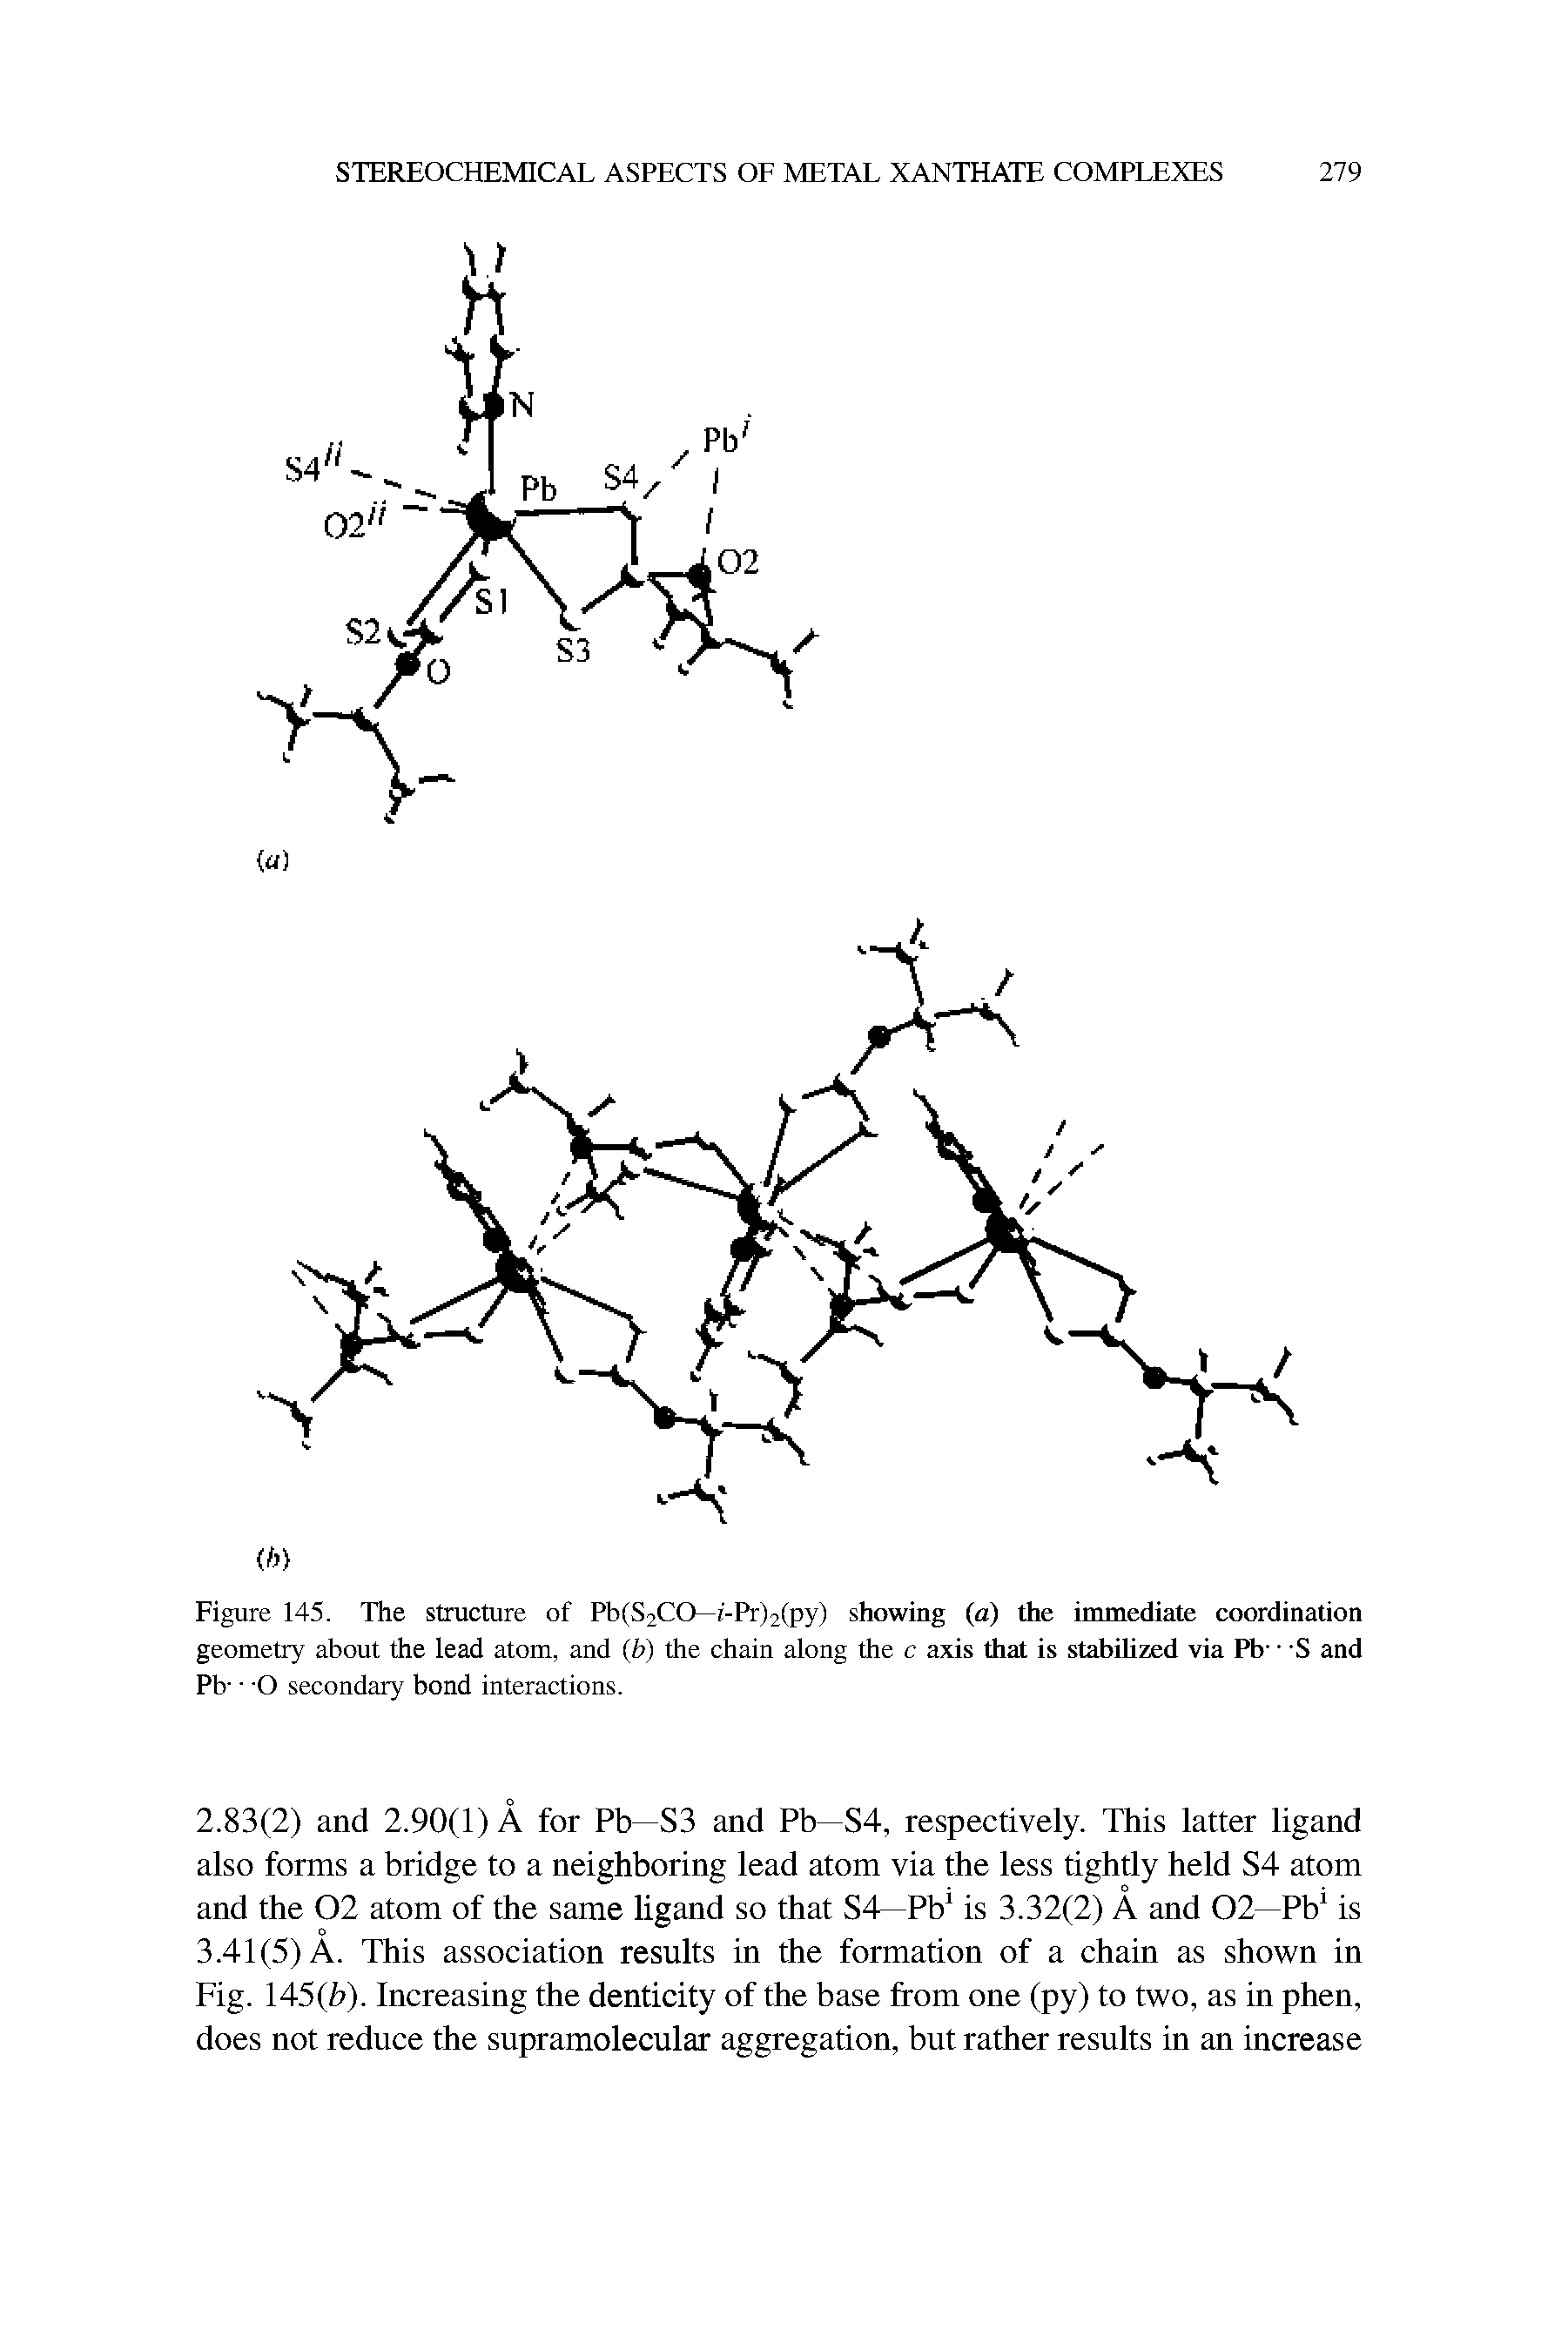 Figure 145. The structure of Pb(S2CO— i-Pr)2(py) showing (a) the immediate coordination geometry about the lead atom, and (b) the chain along the c axis that is stabilized via Pb S and Pb- O secondary bond interactions.